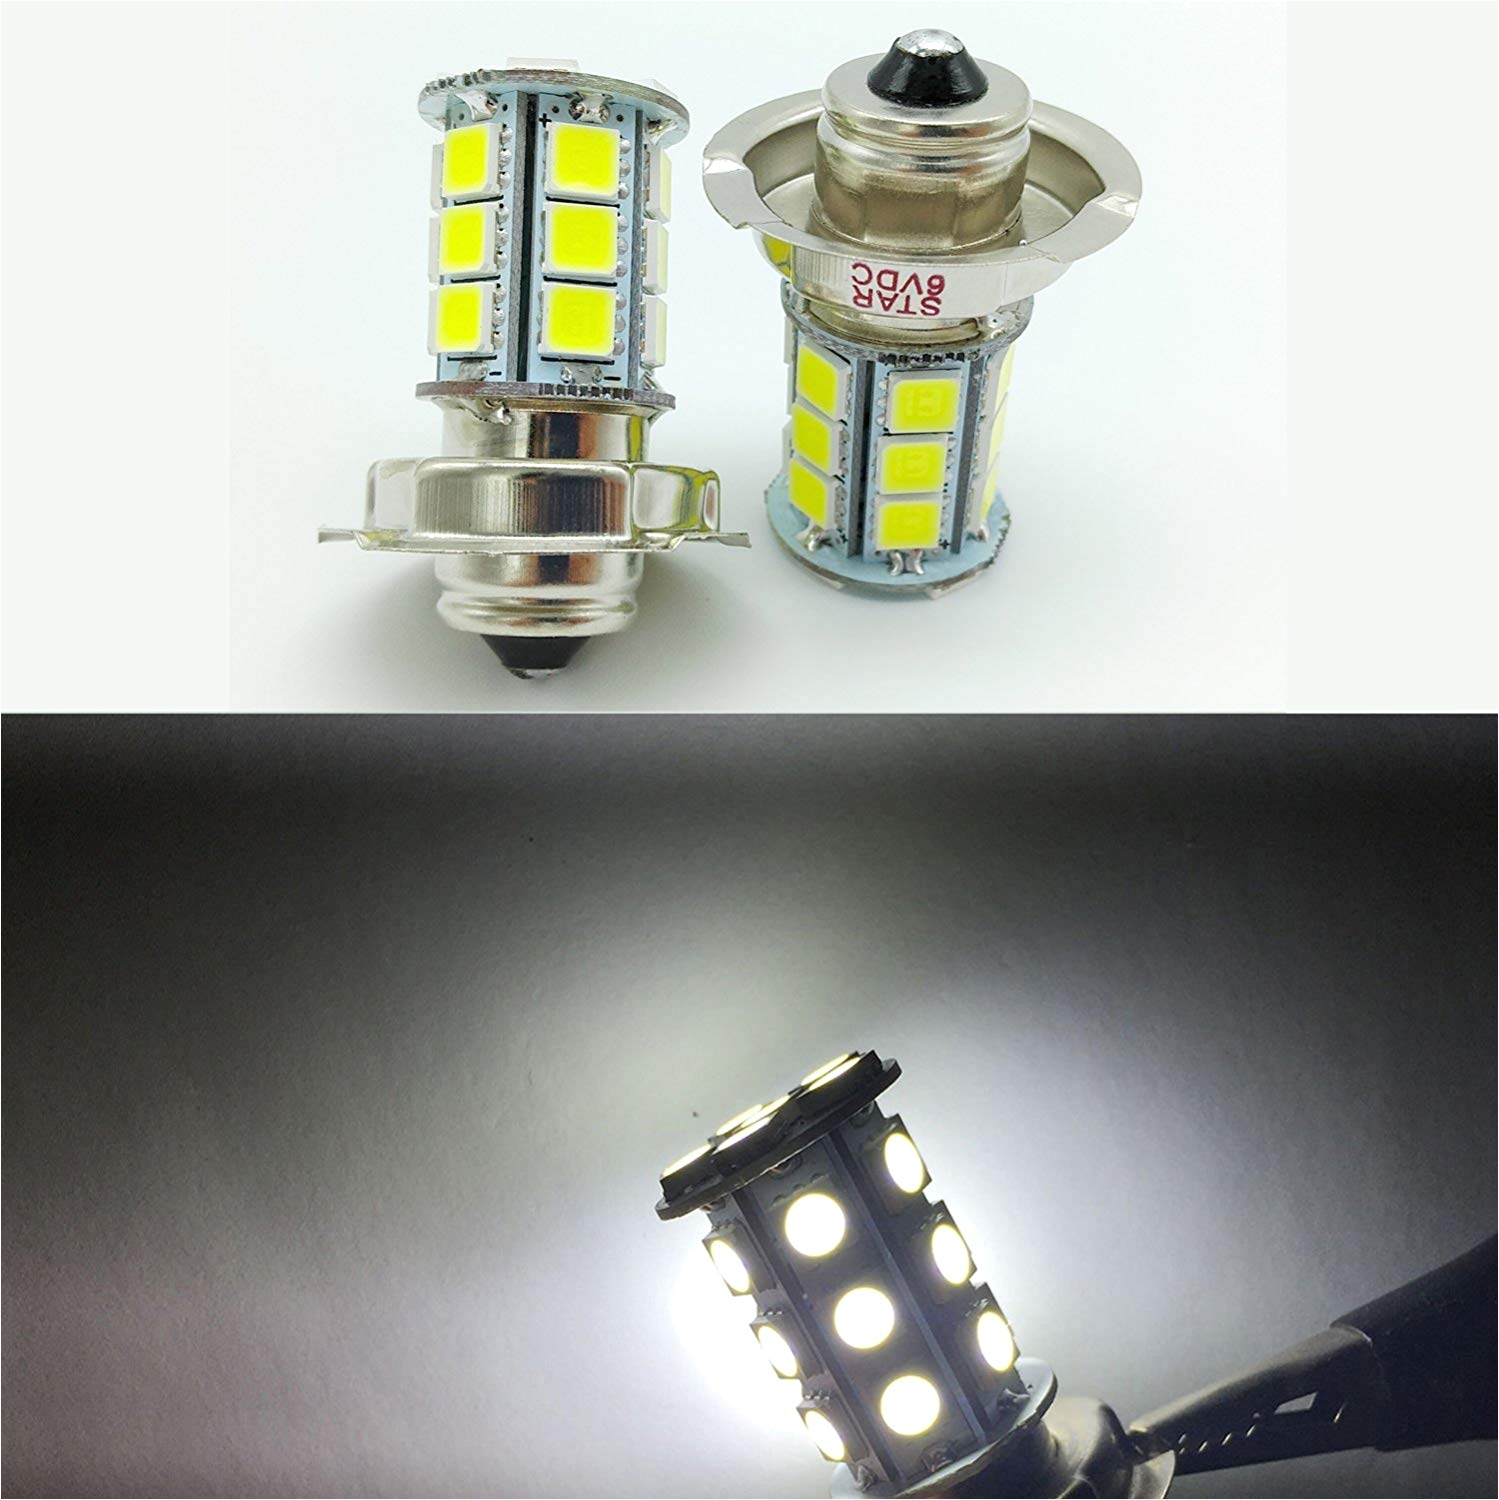 amazon com 2 x 6v 24 smd motorbike motorcycle p26s led bulbs headlight car lamp for scooter moped white 6000k 15w home improvement